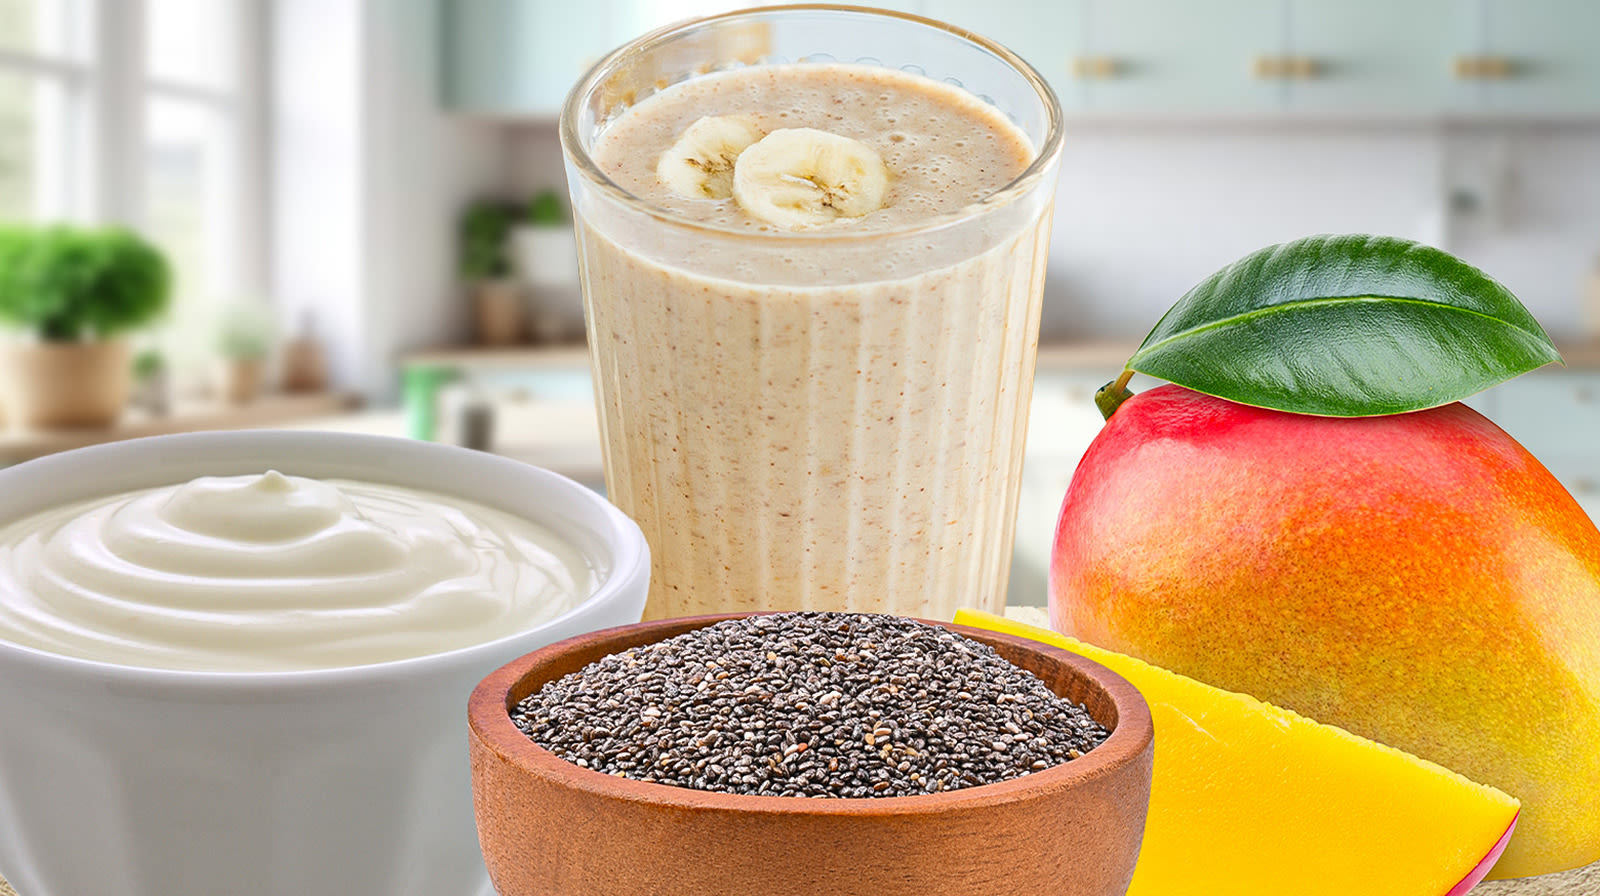 10 Best Substitutes For Banana In Smoothies